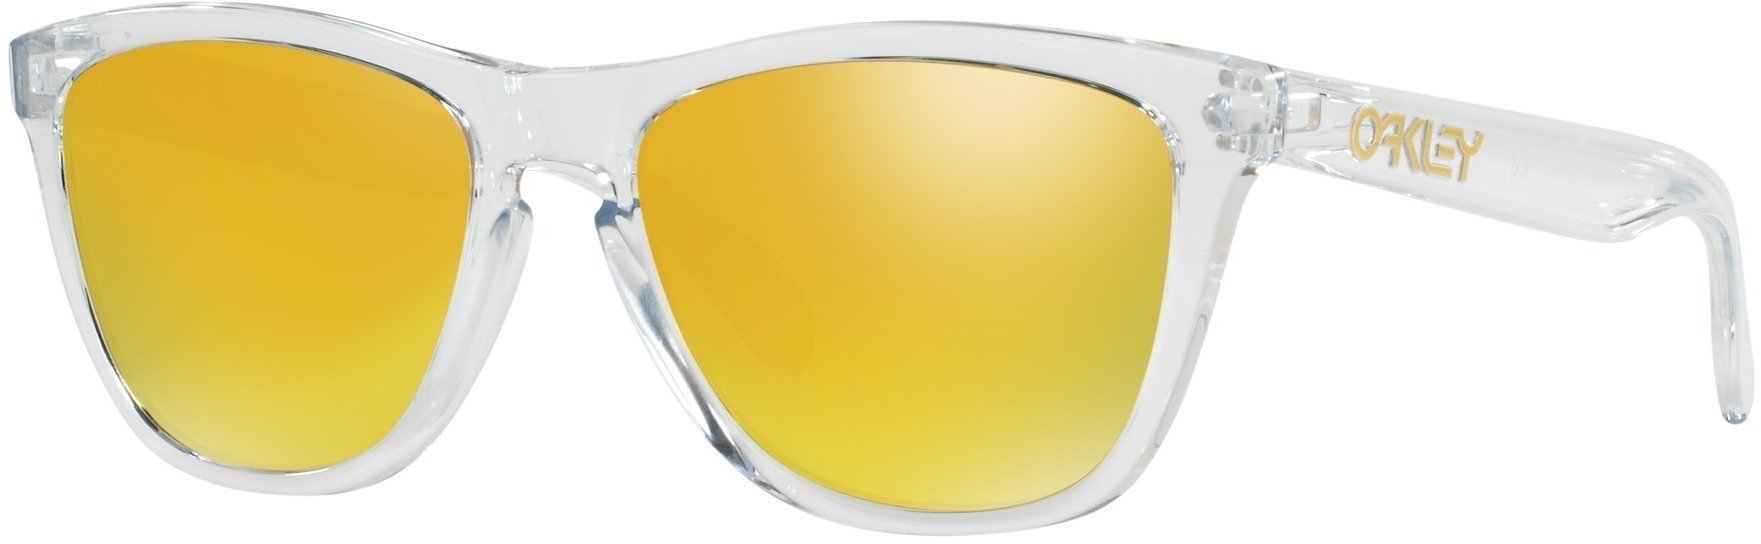 Sport Glasses Oakley Frogskins Crystal Collection 24k Iridium Polished Clear